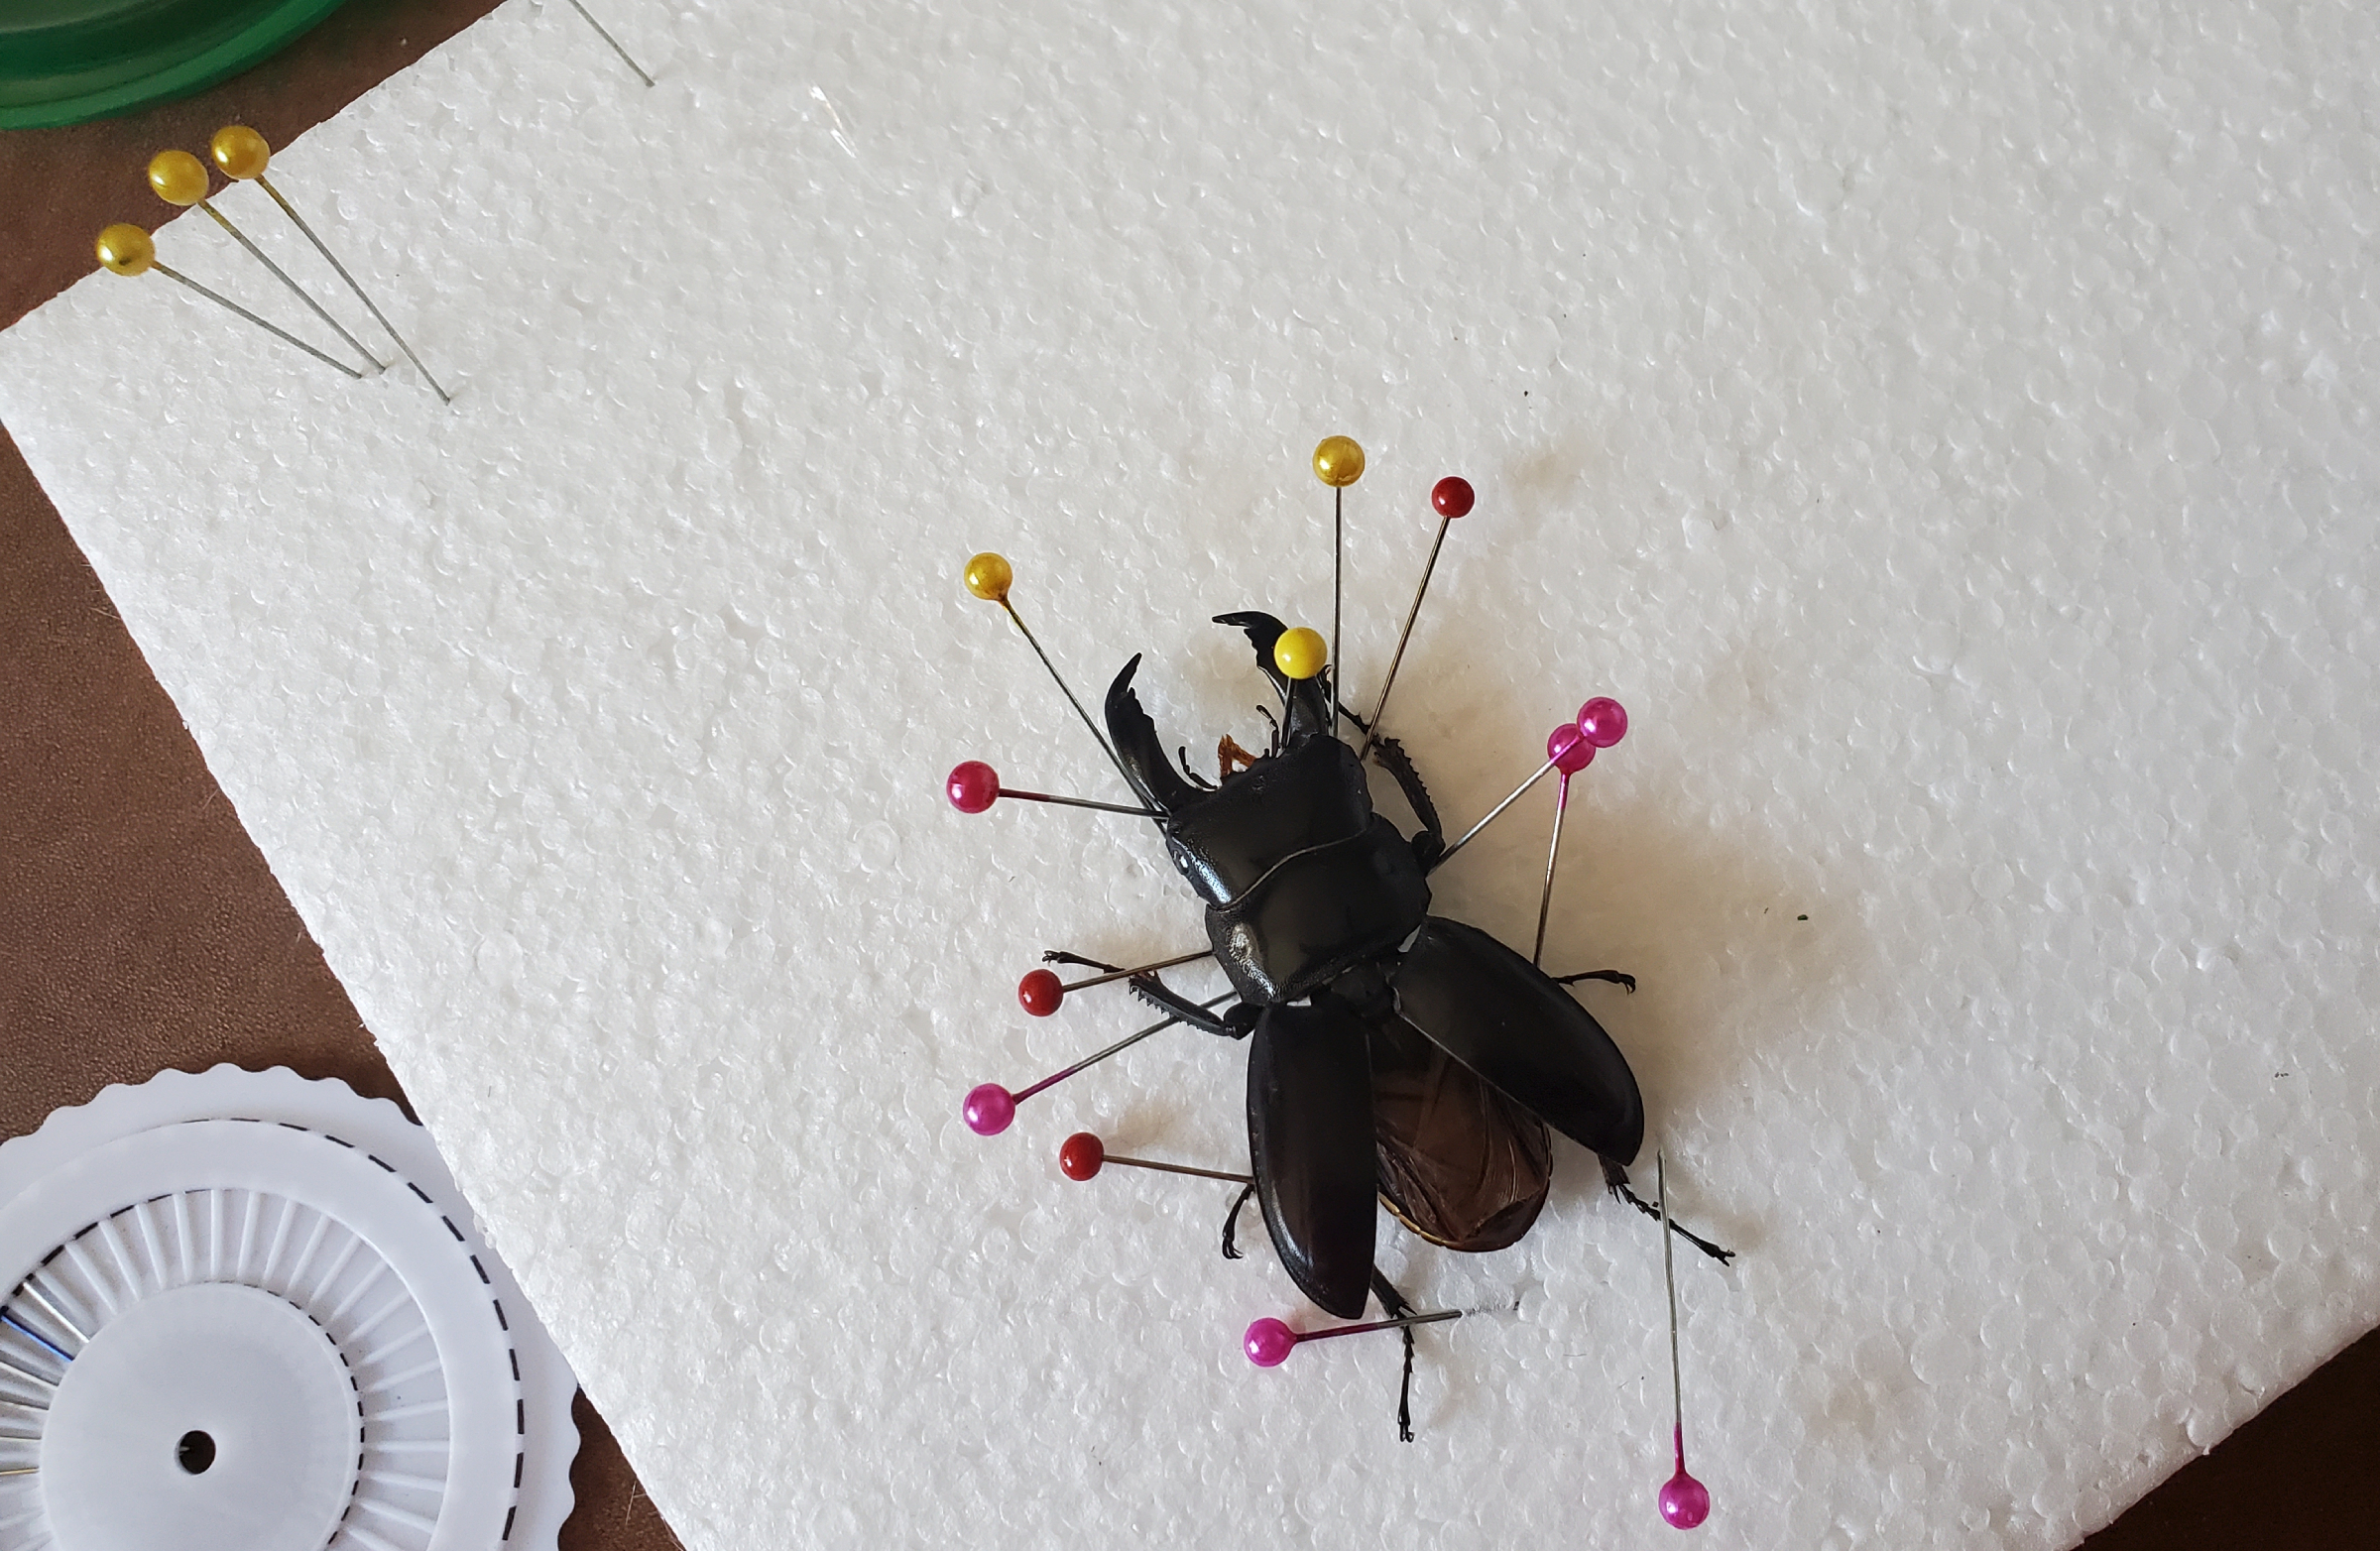 Beetle on foam block with colorful straight pins holding the legs, mandibles, and Elytra in place